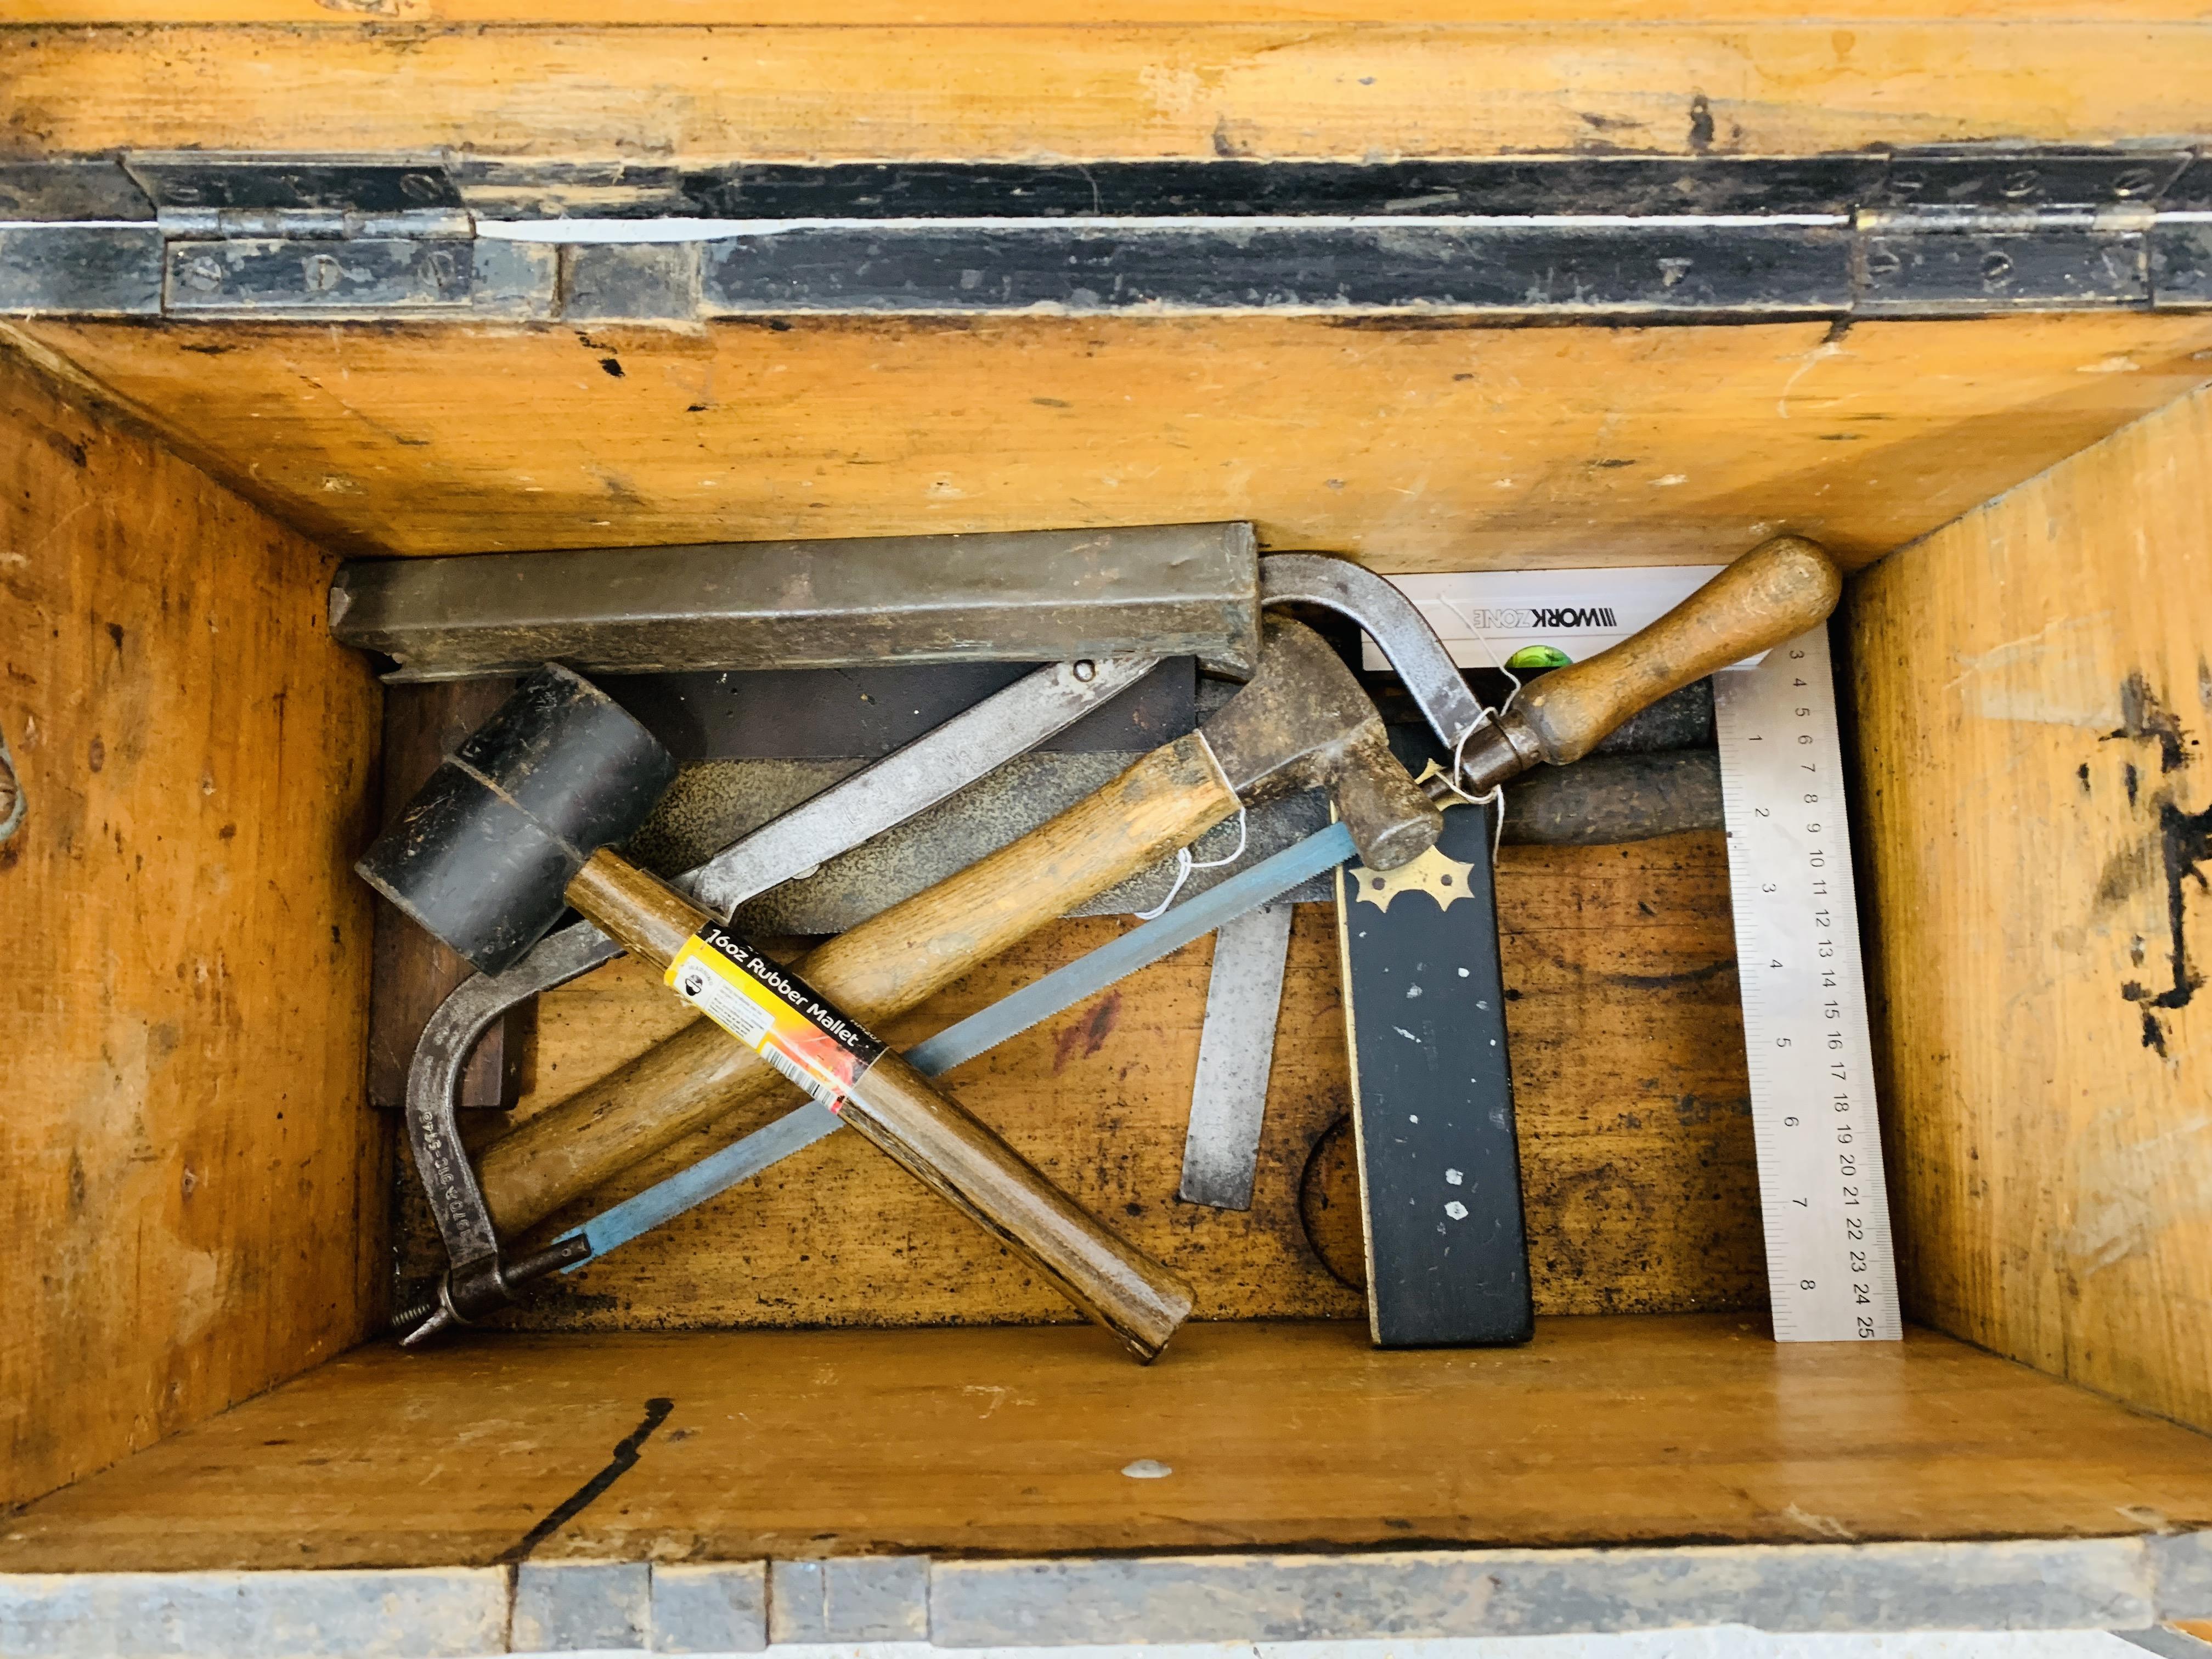 2 WOODEN CARPENTRY BOXES CONTAINING VARIOUS HAND TOOLS TO INCLUDE PLANES, FILES, MEASURES ETC. - Image 3 of 8